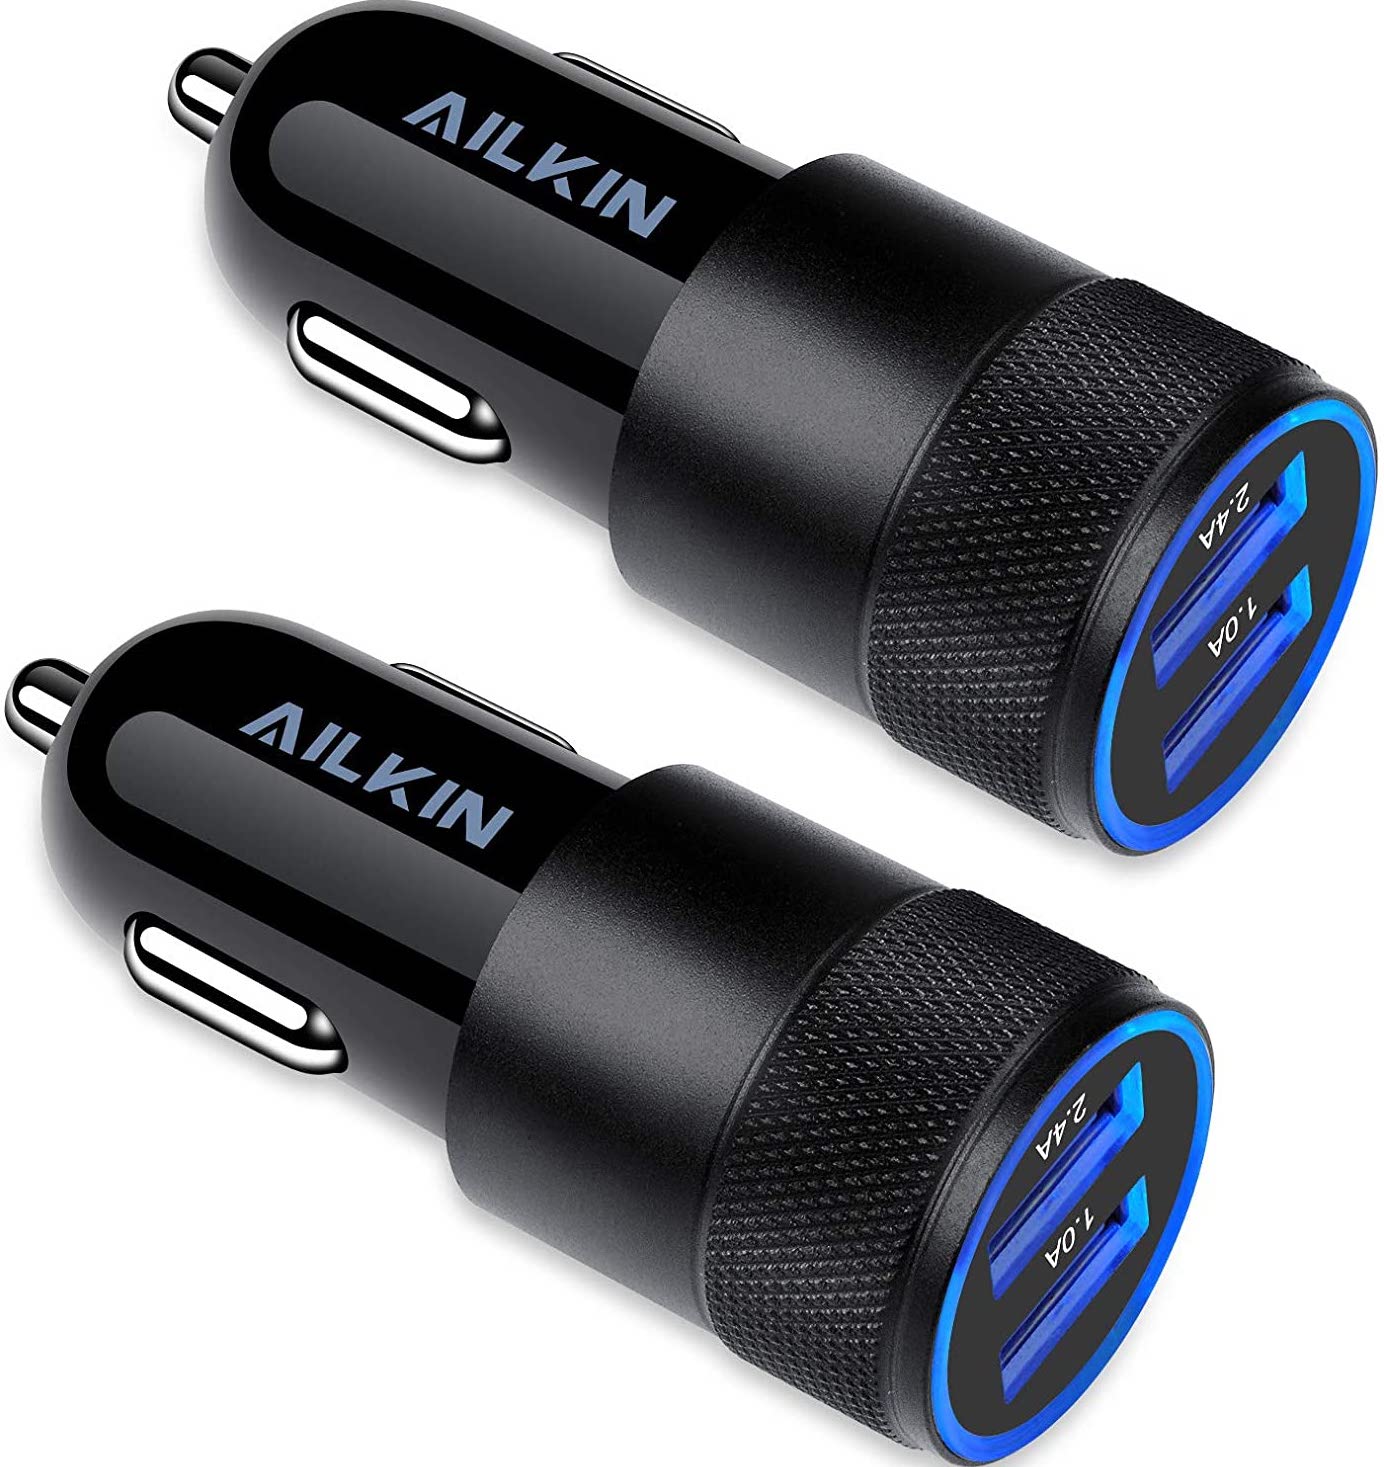 Ailkin Car Charger Render